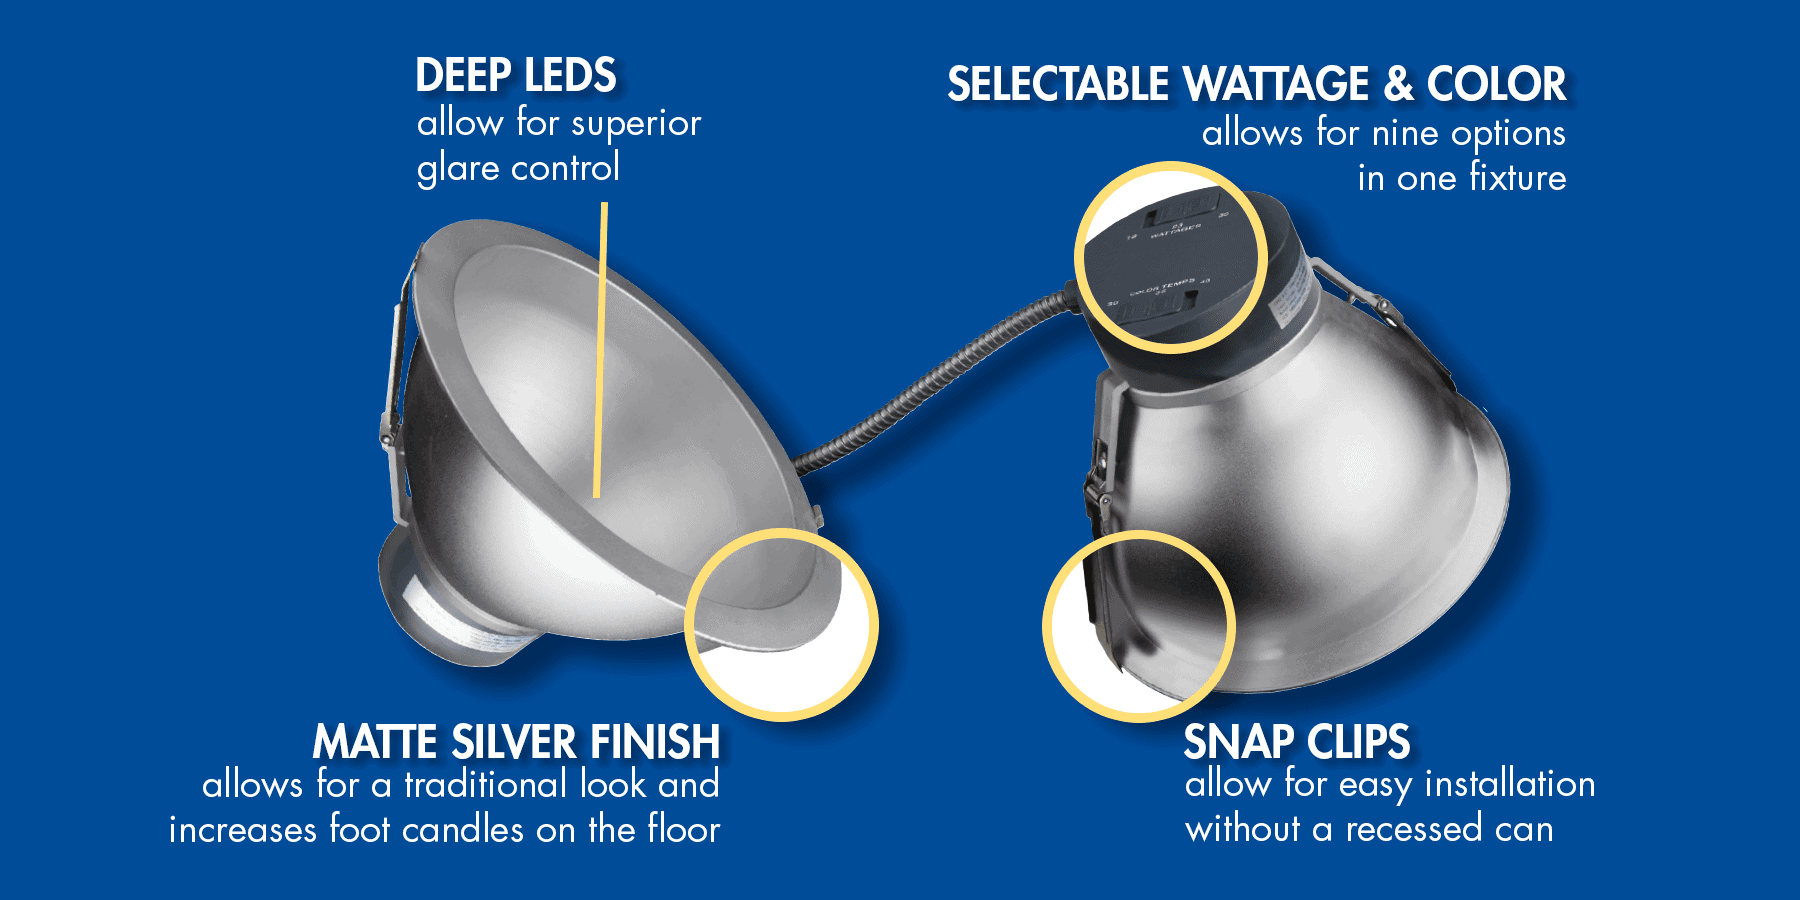 Selectable Wattage LED Downlights Cross Section